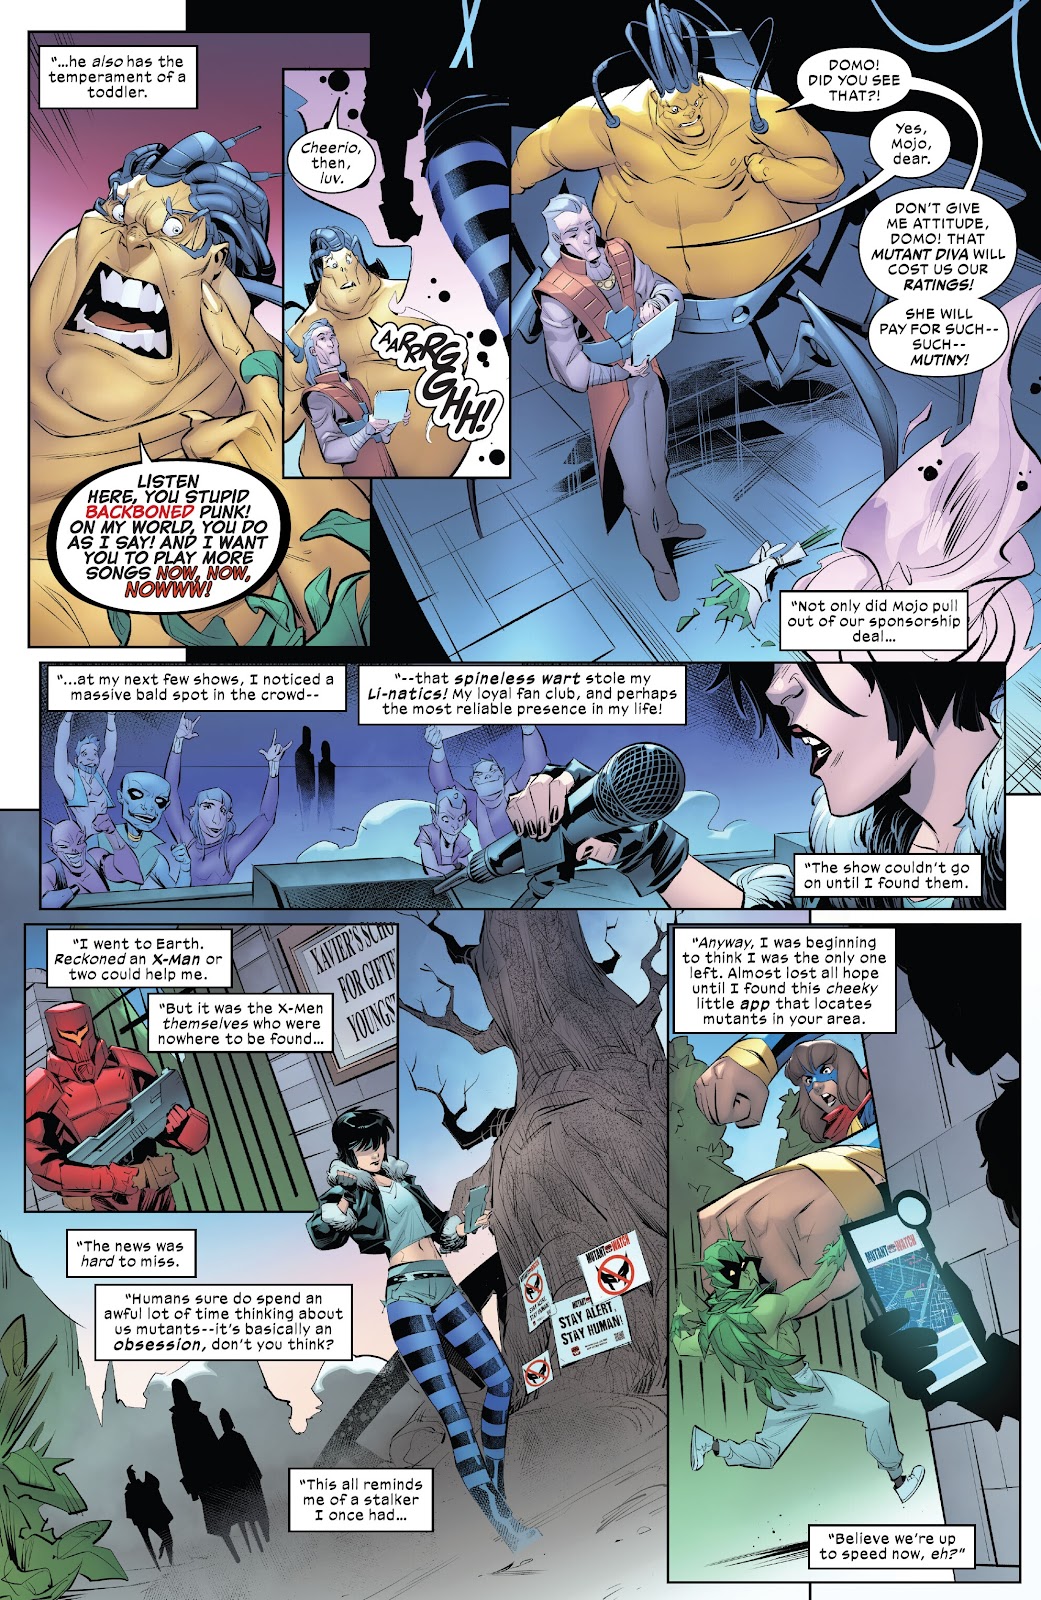 Ms. Marvel: Mutant Menace issue 2 - Page 4